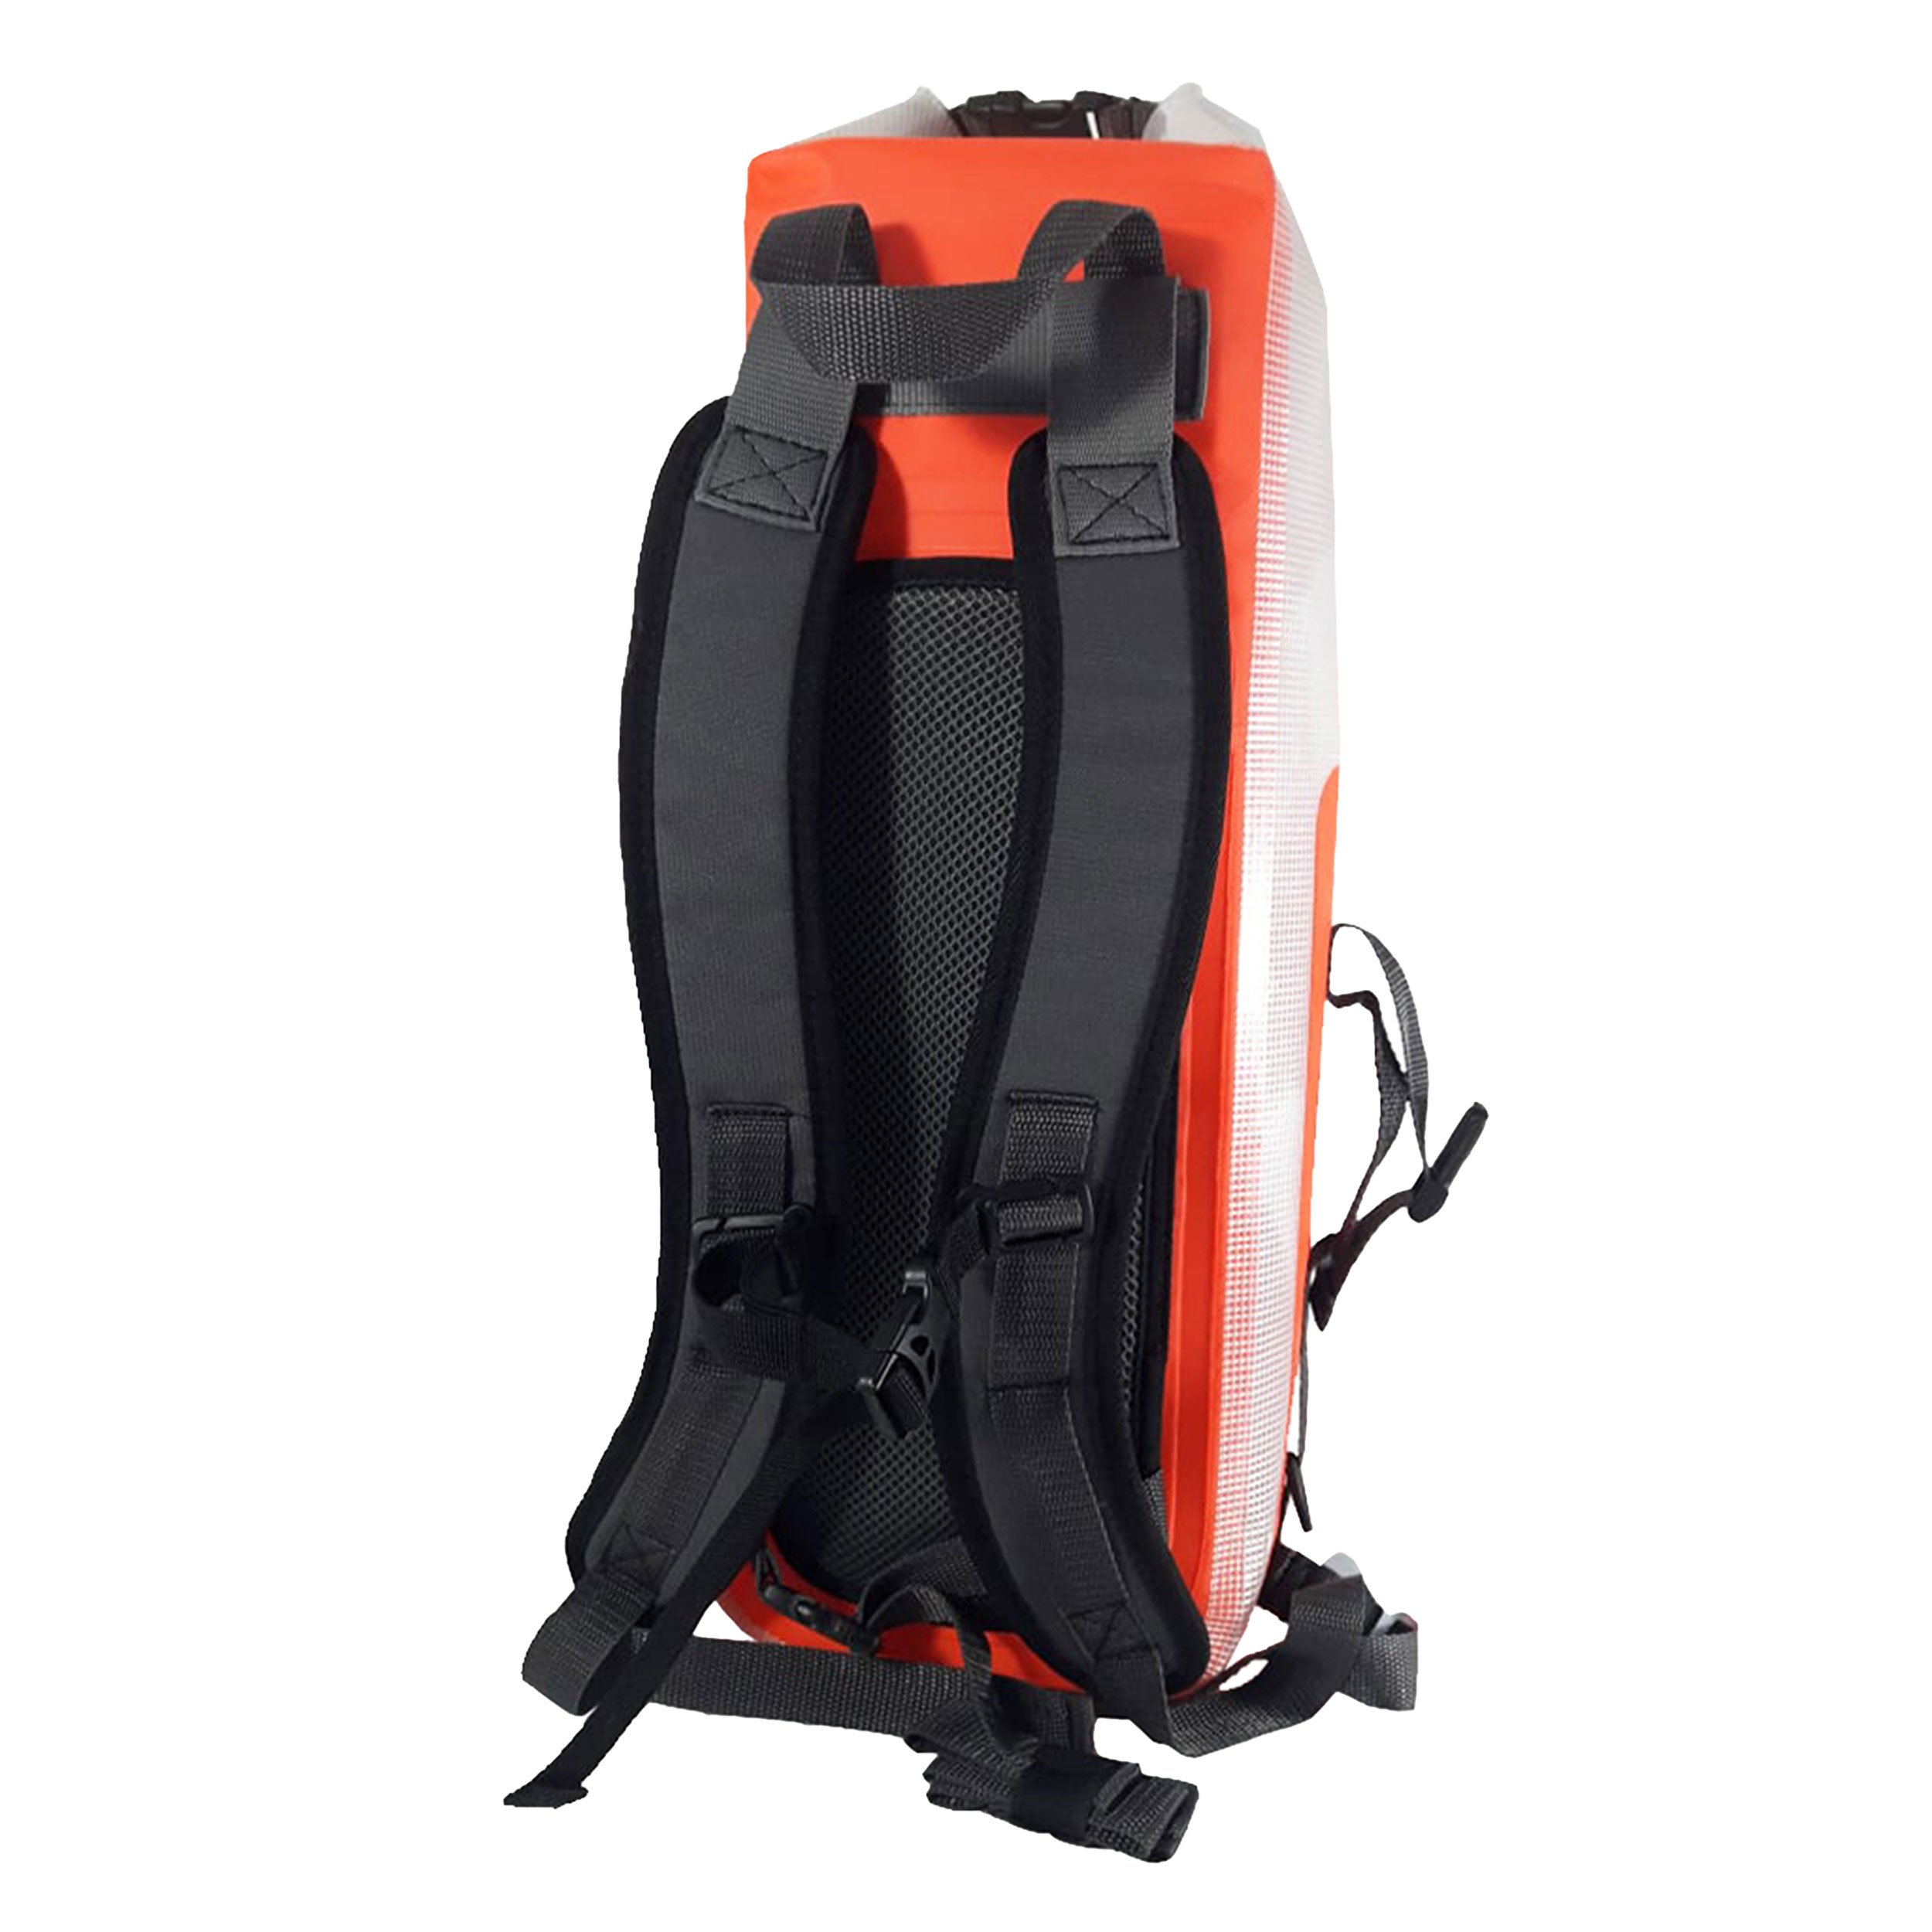 Accessoires — SUP BOX - Experten im Stand Up Paddling und Wingfoiling